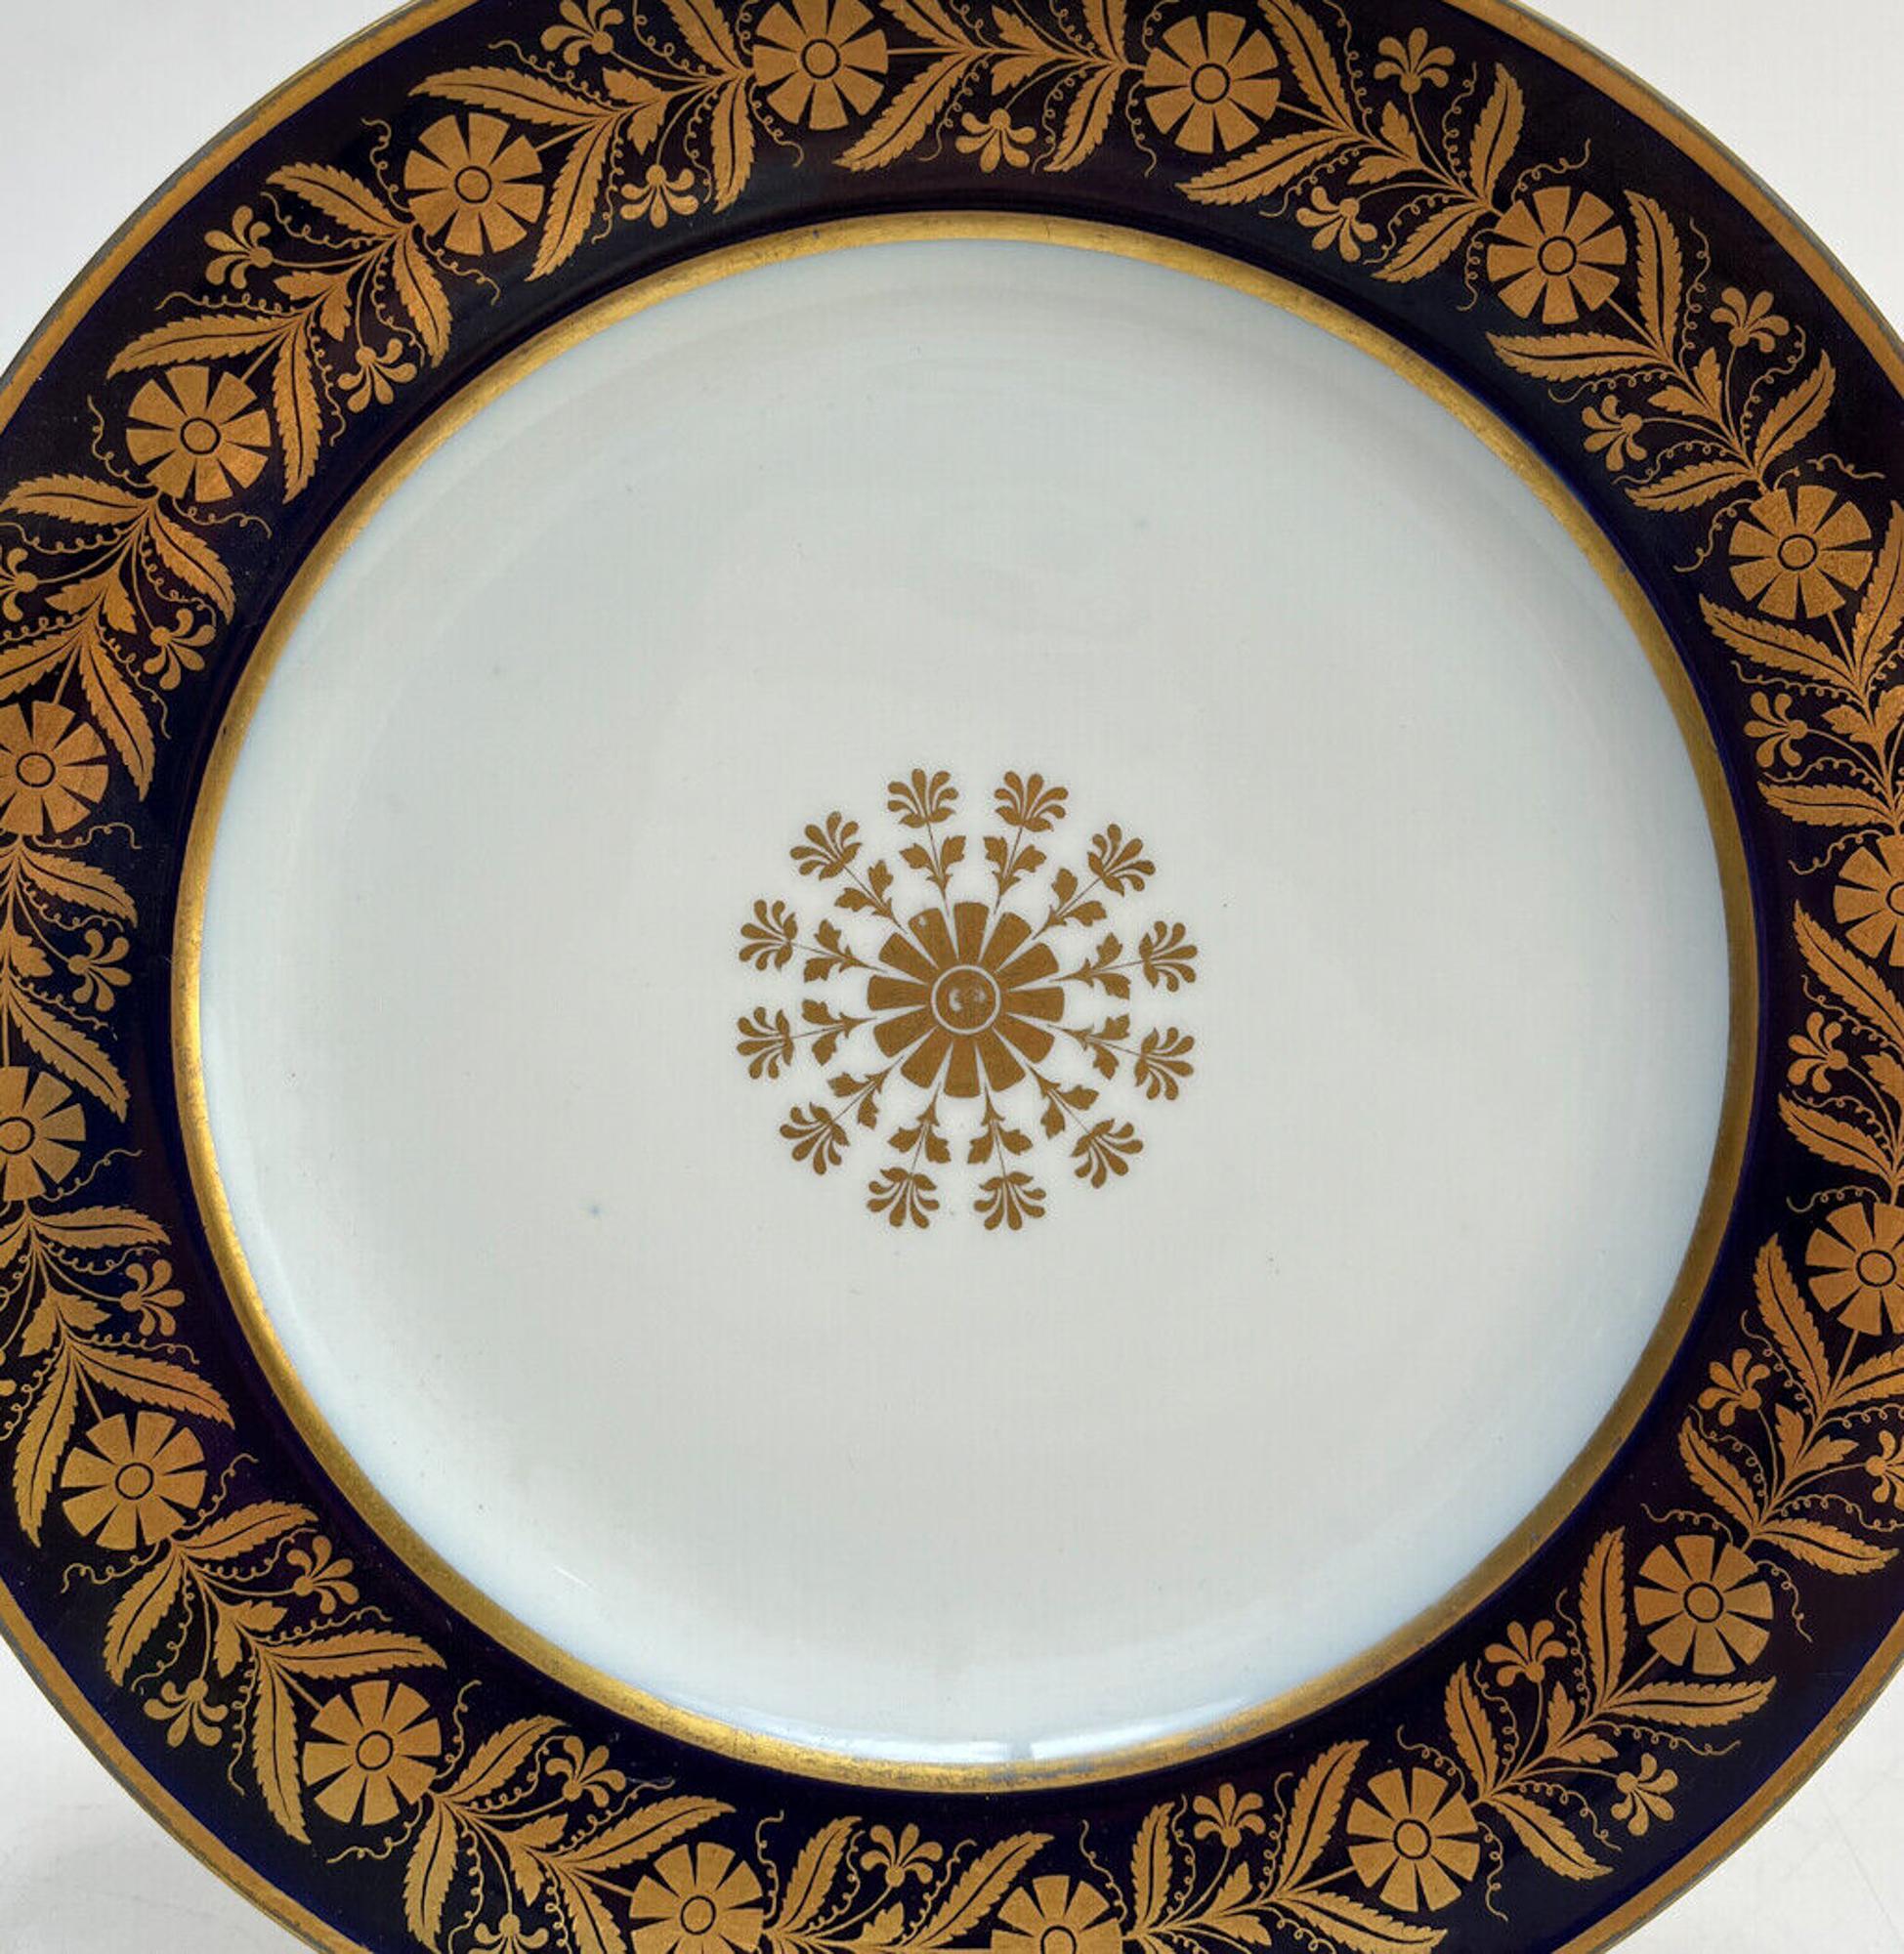 Manufacture de Sevres Porcelain Cabinet Plate, 1855. Cobalt blue ground with a gilt floral medallion to the center and florals to the rim. Manufacture de Sevres mark to the underside with various incised letters and numbers.

Additional